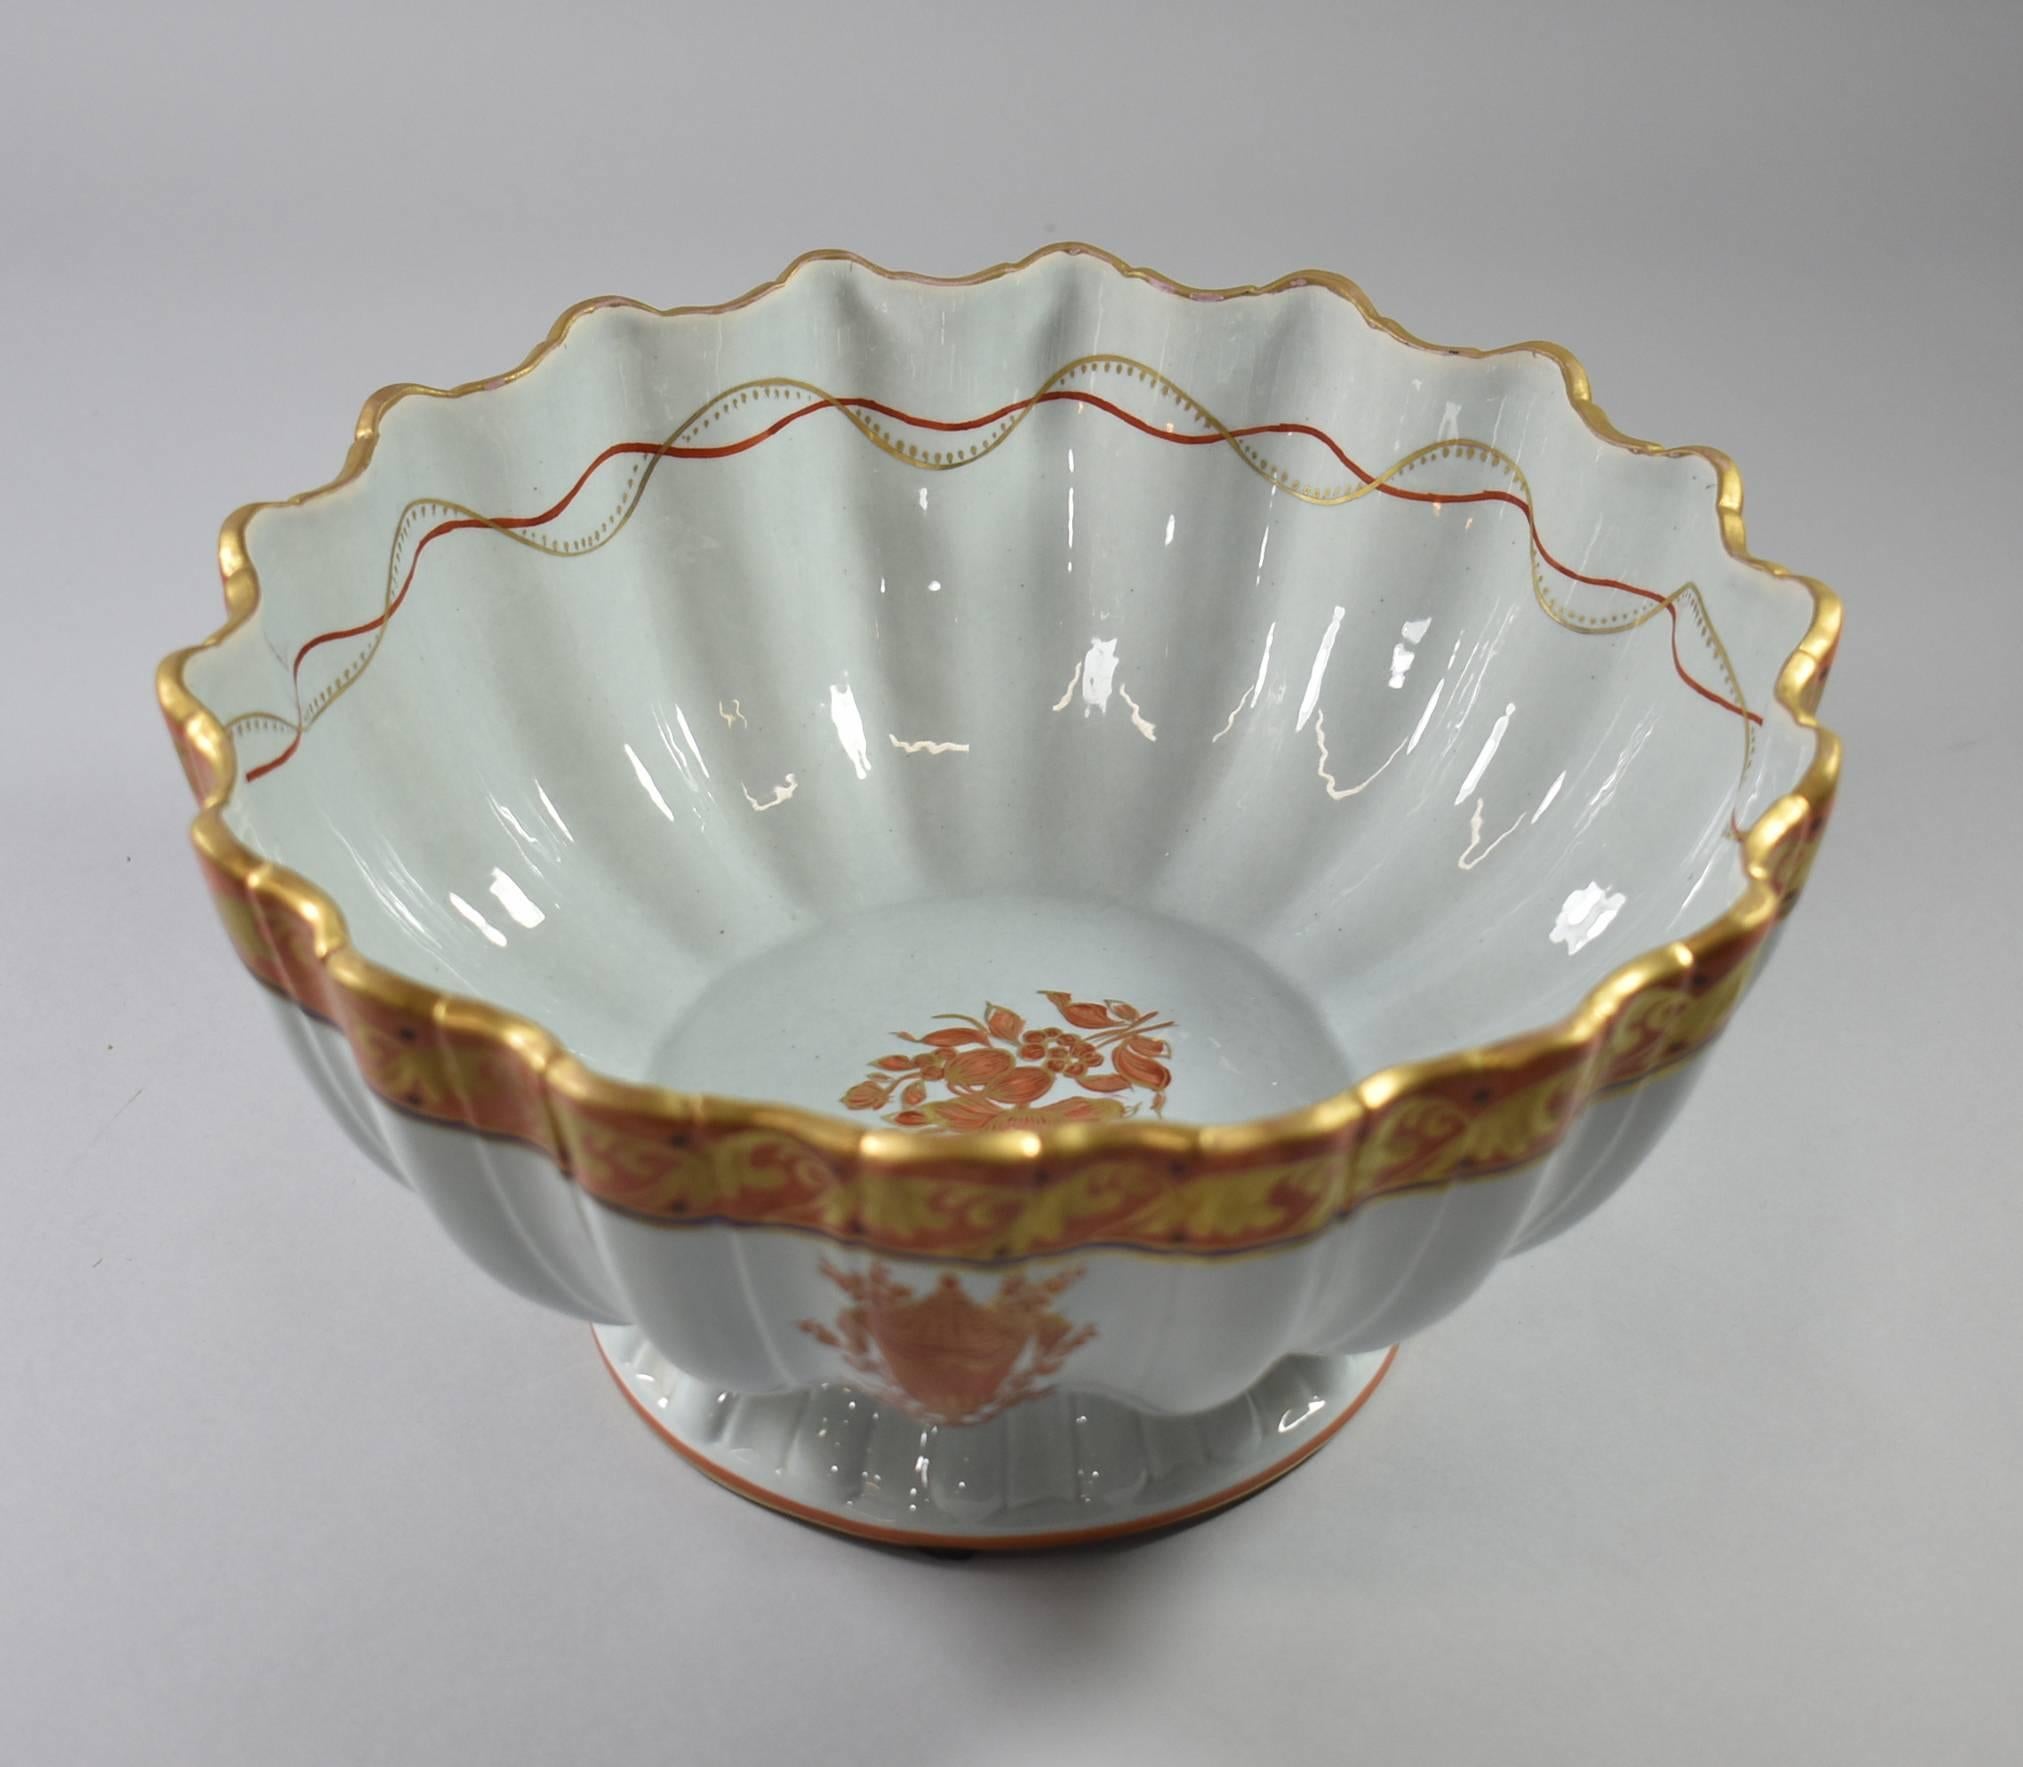 A magnificent Italian bowl by Mottahedeh. This beautiful footed bowl features a scalloped edge with an urn detail in shades of orange and gold. Mottahedeh did custom work for many high end jewelry stores and was known for supplying the White House.